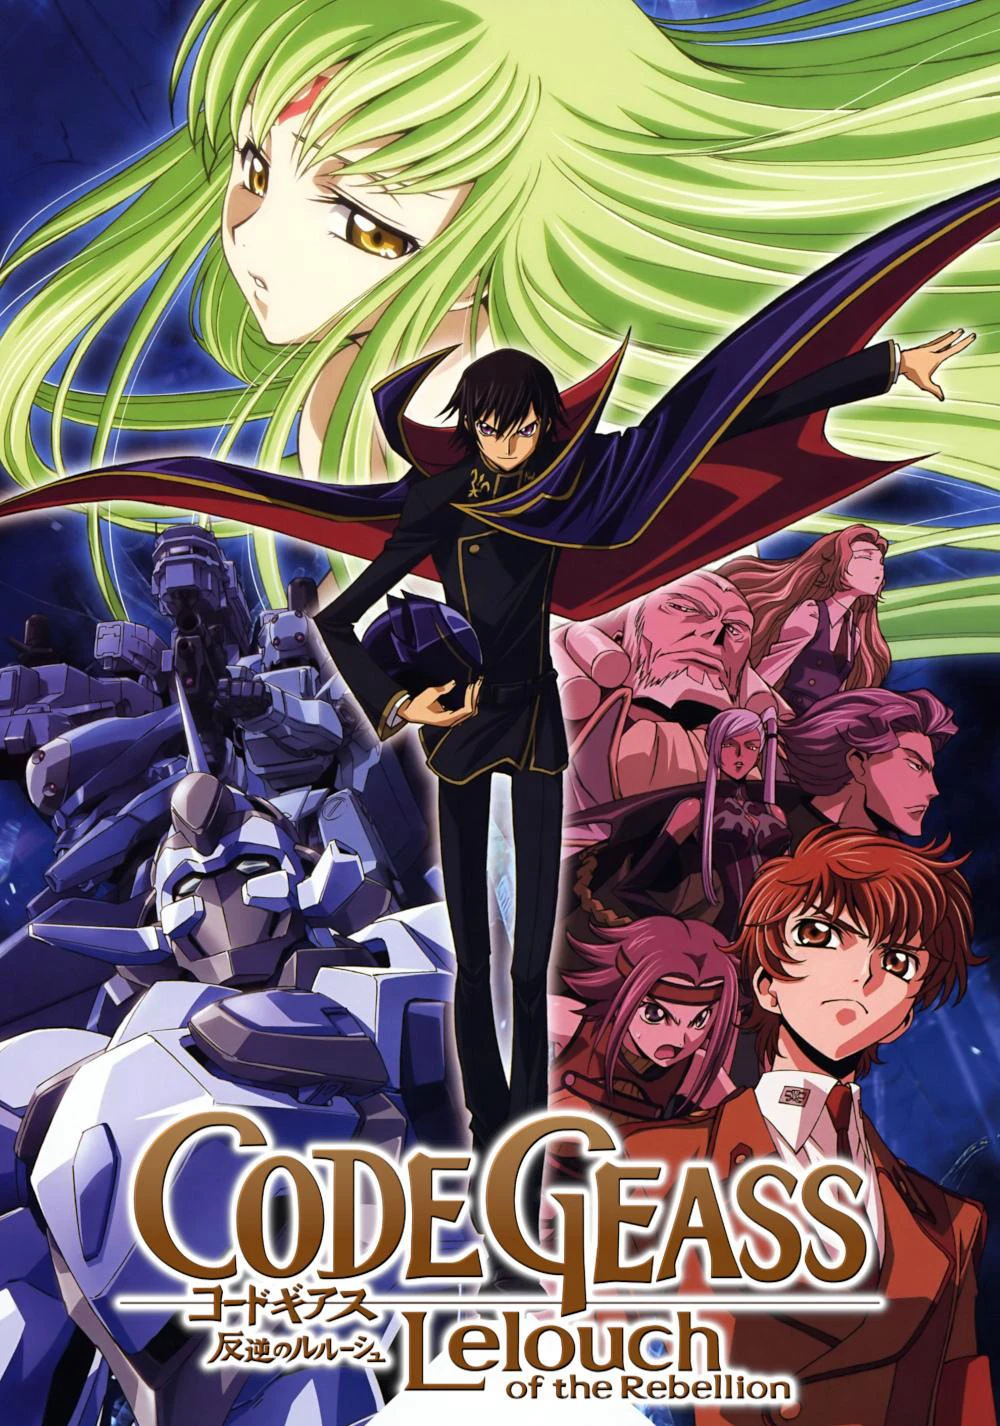 Code Geass: Lelouch of the Rebellion - Rebellion | Con đường tạo phản - Bstation Tập 1 (2018)